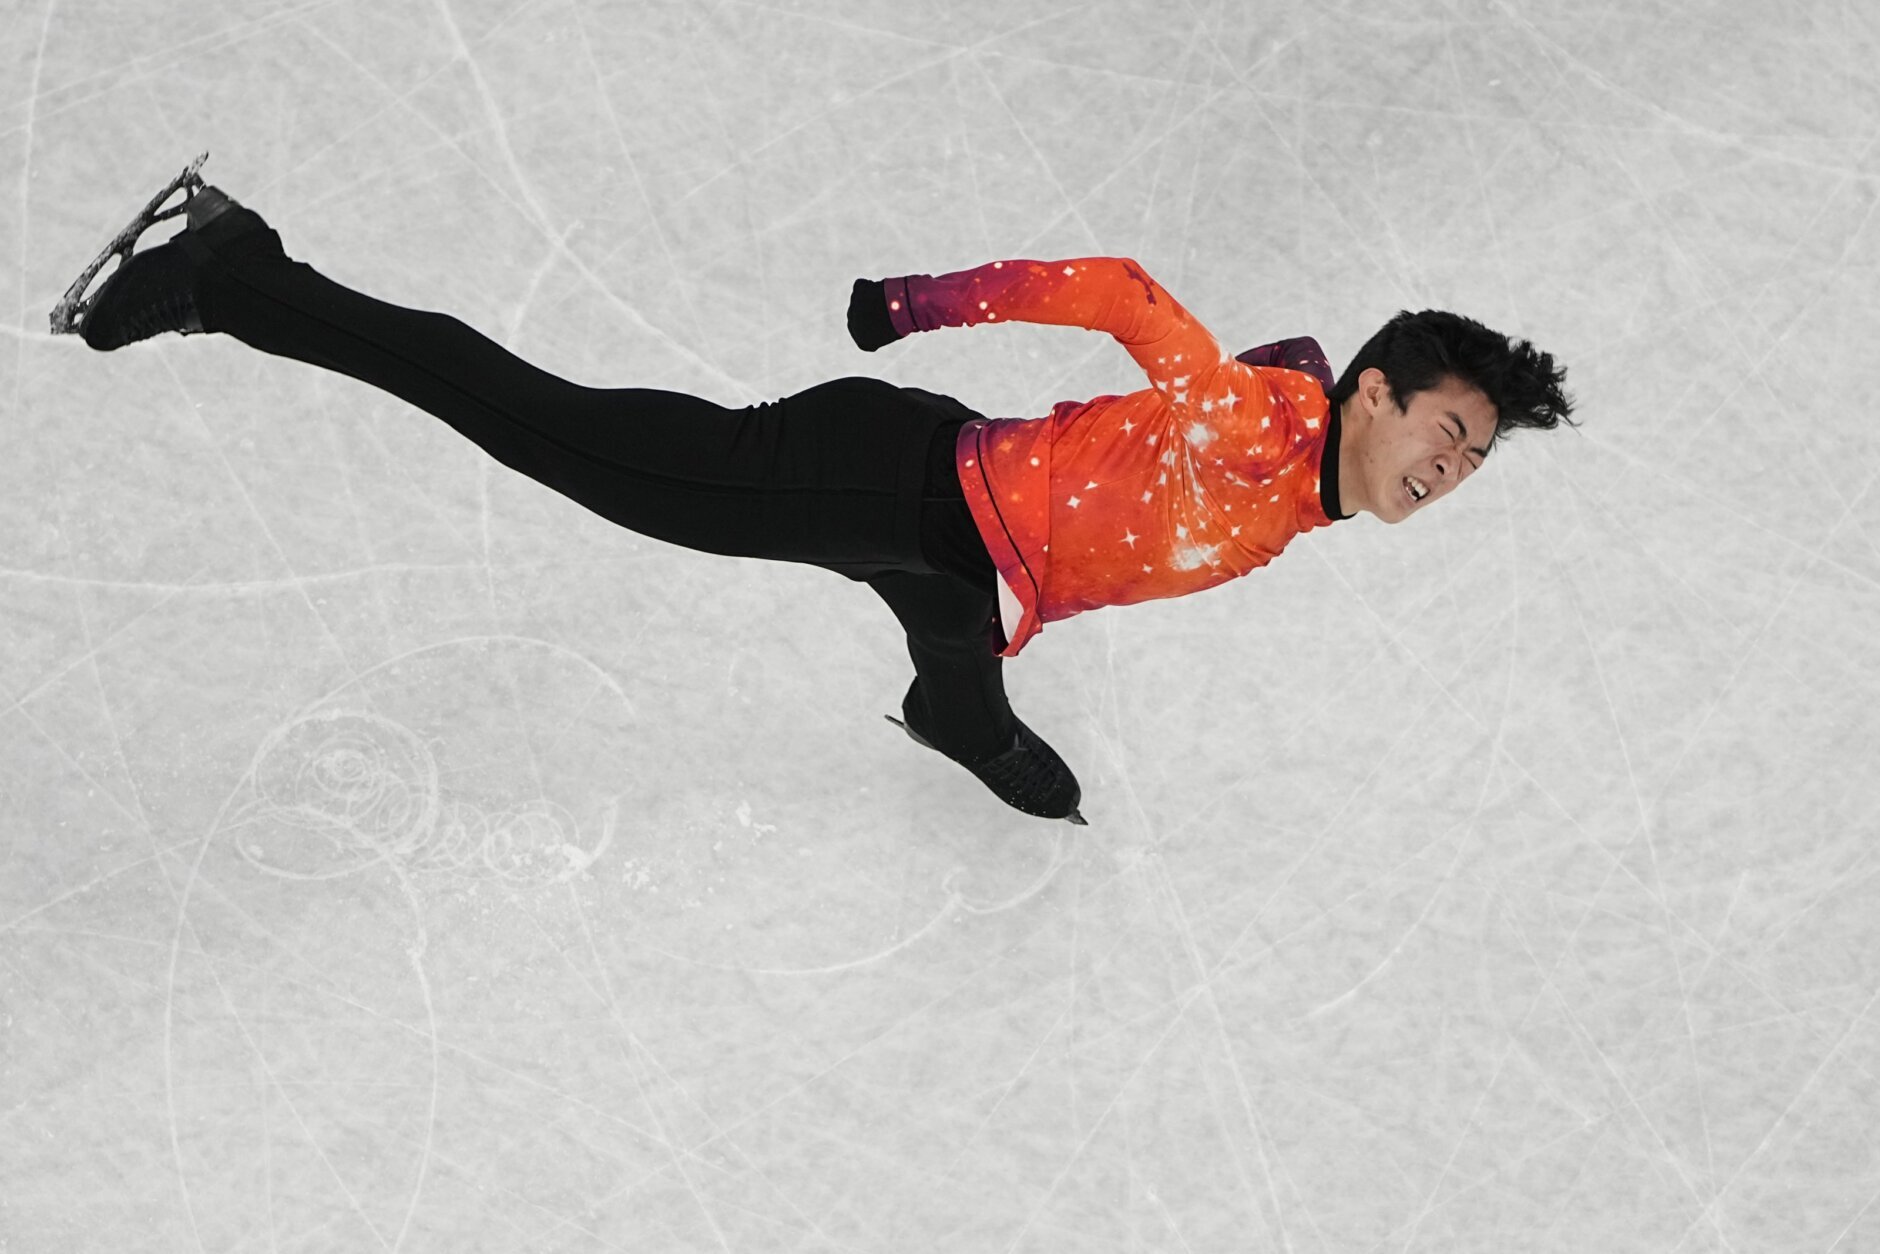 Nathan Chen, of the United States, competes in the men's free skate program during the figure skating event at the 2022 Winter Olympics, Thursday, Feb. 10, 2022, in Beijing. (AP Photo/Jeff Roberson)